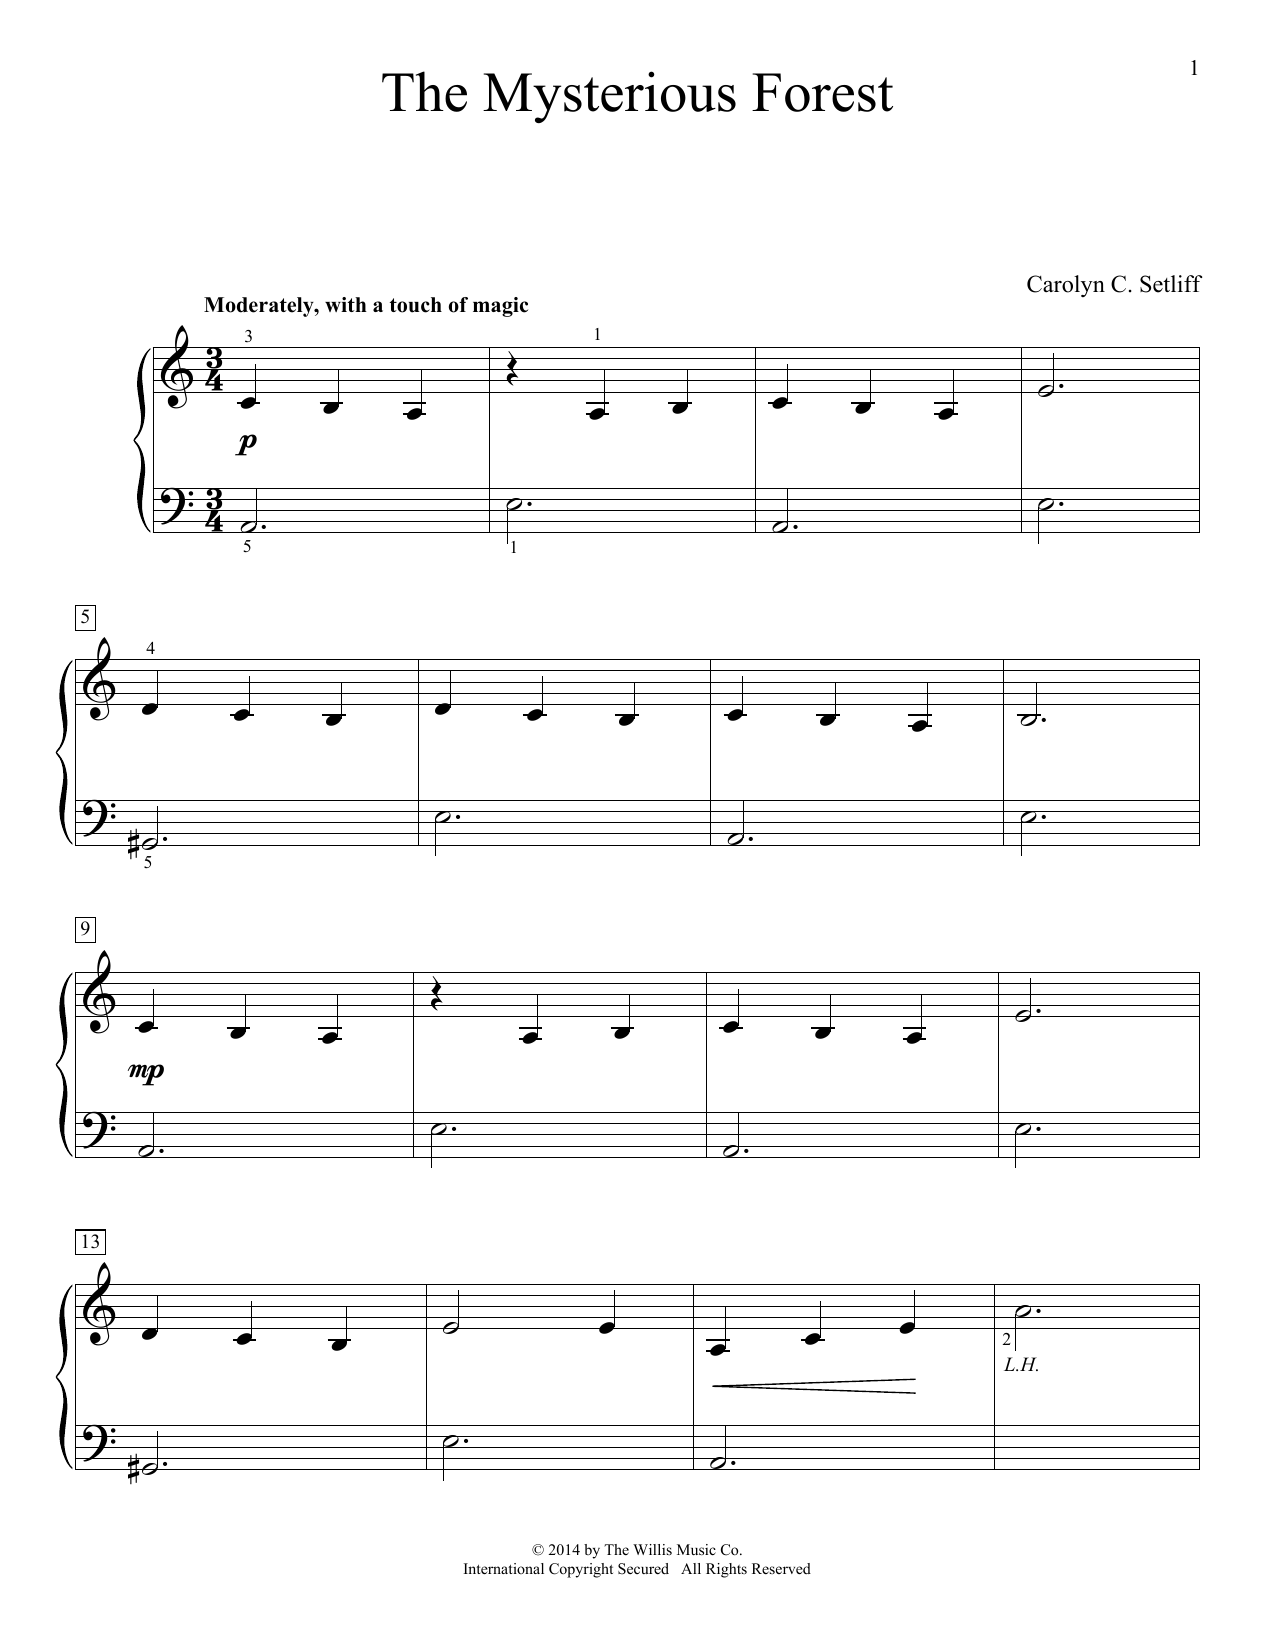 Download Carolyn C. Setliff The Mysterious Forest Sheet Music